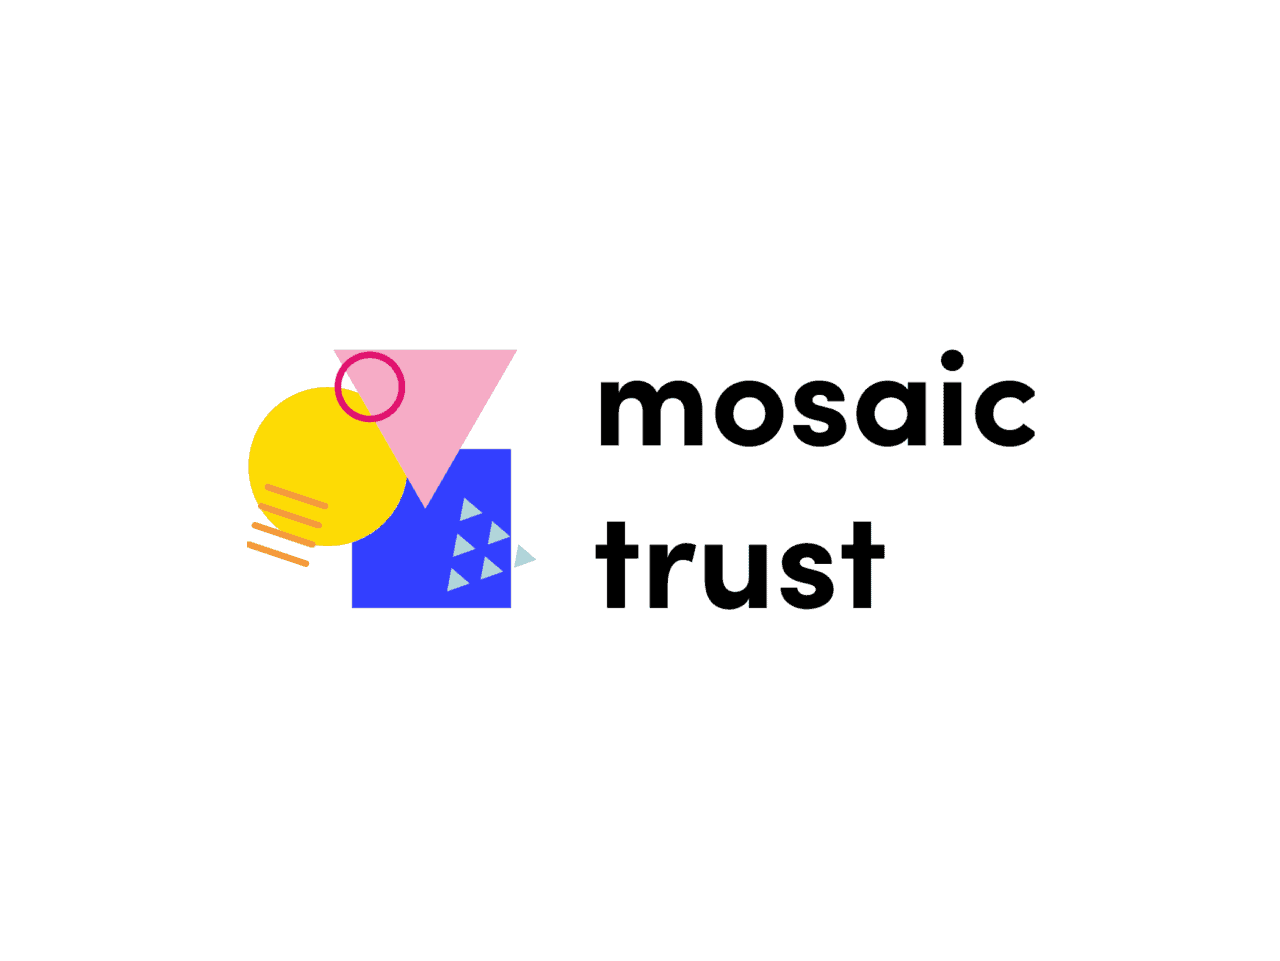 A yellow circle, a pink triangle and a blue square and on the right side of them Mosaic Trust is written in black, the word "trust" is on the bottom line.